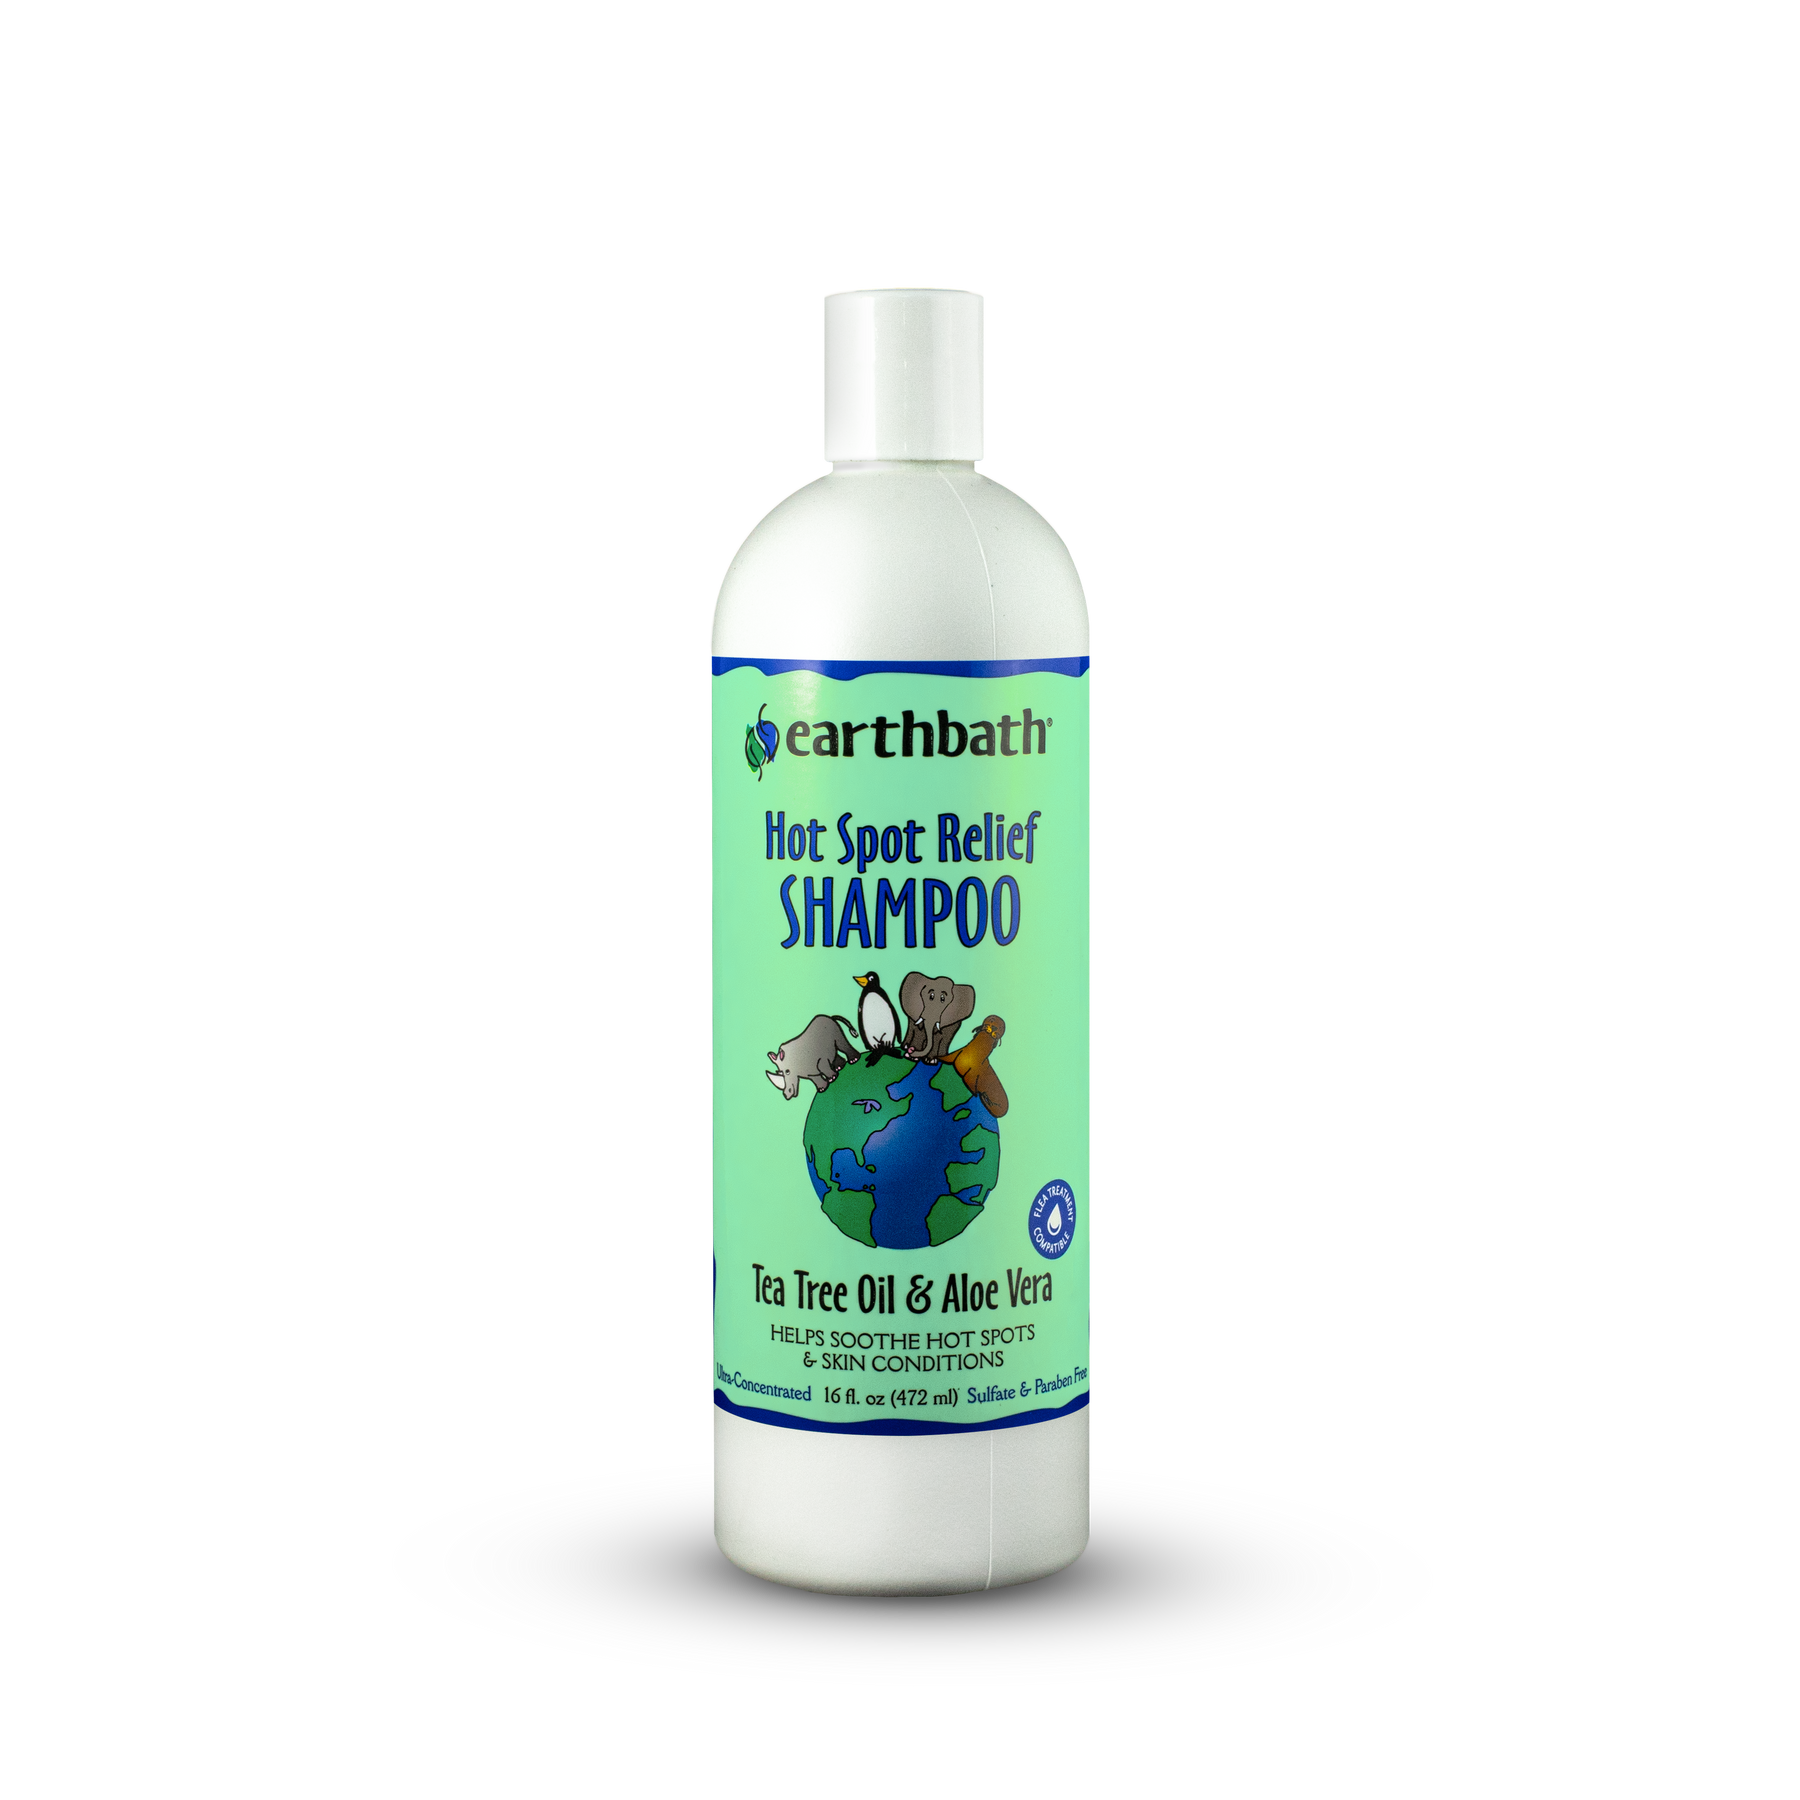 earthbath® Hot Spot Relief Shampoo, Tea Tree Oil & Aloe Vera, Helps Soothe Hot Spots & Skin Conditions, Made in USA, 16 oz